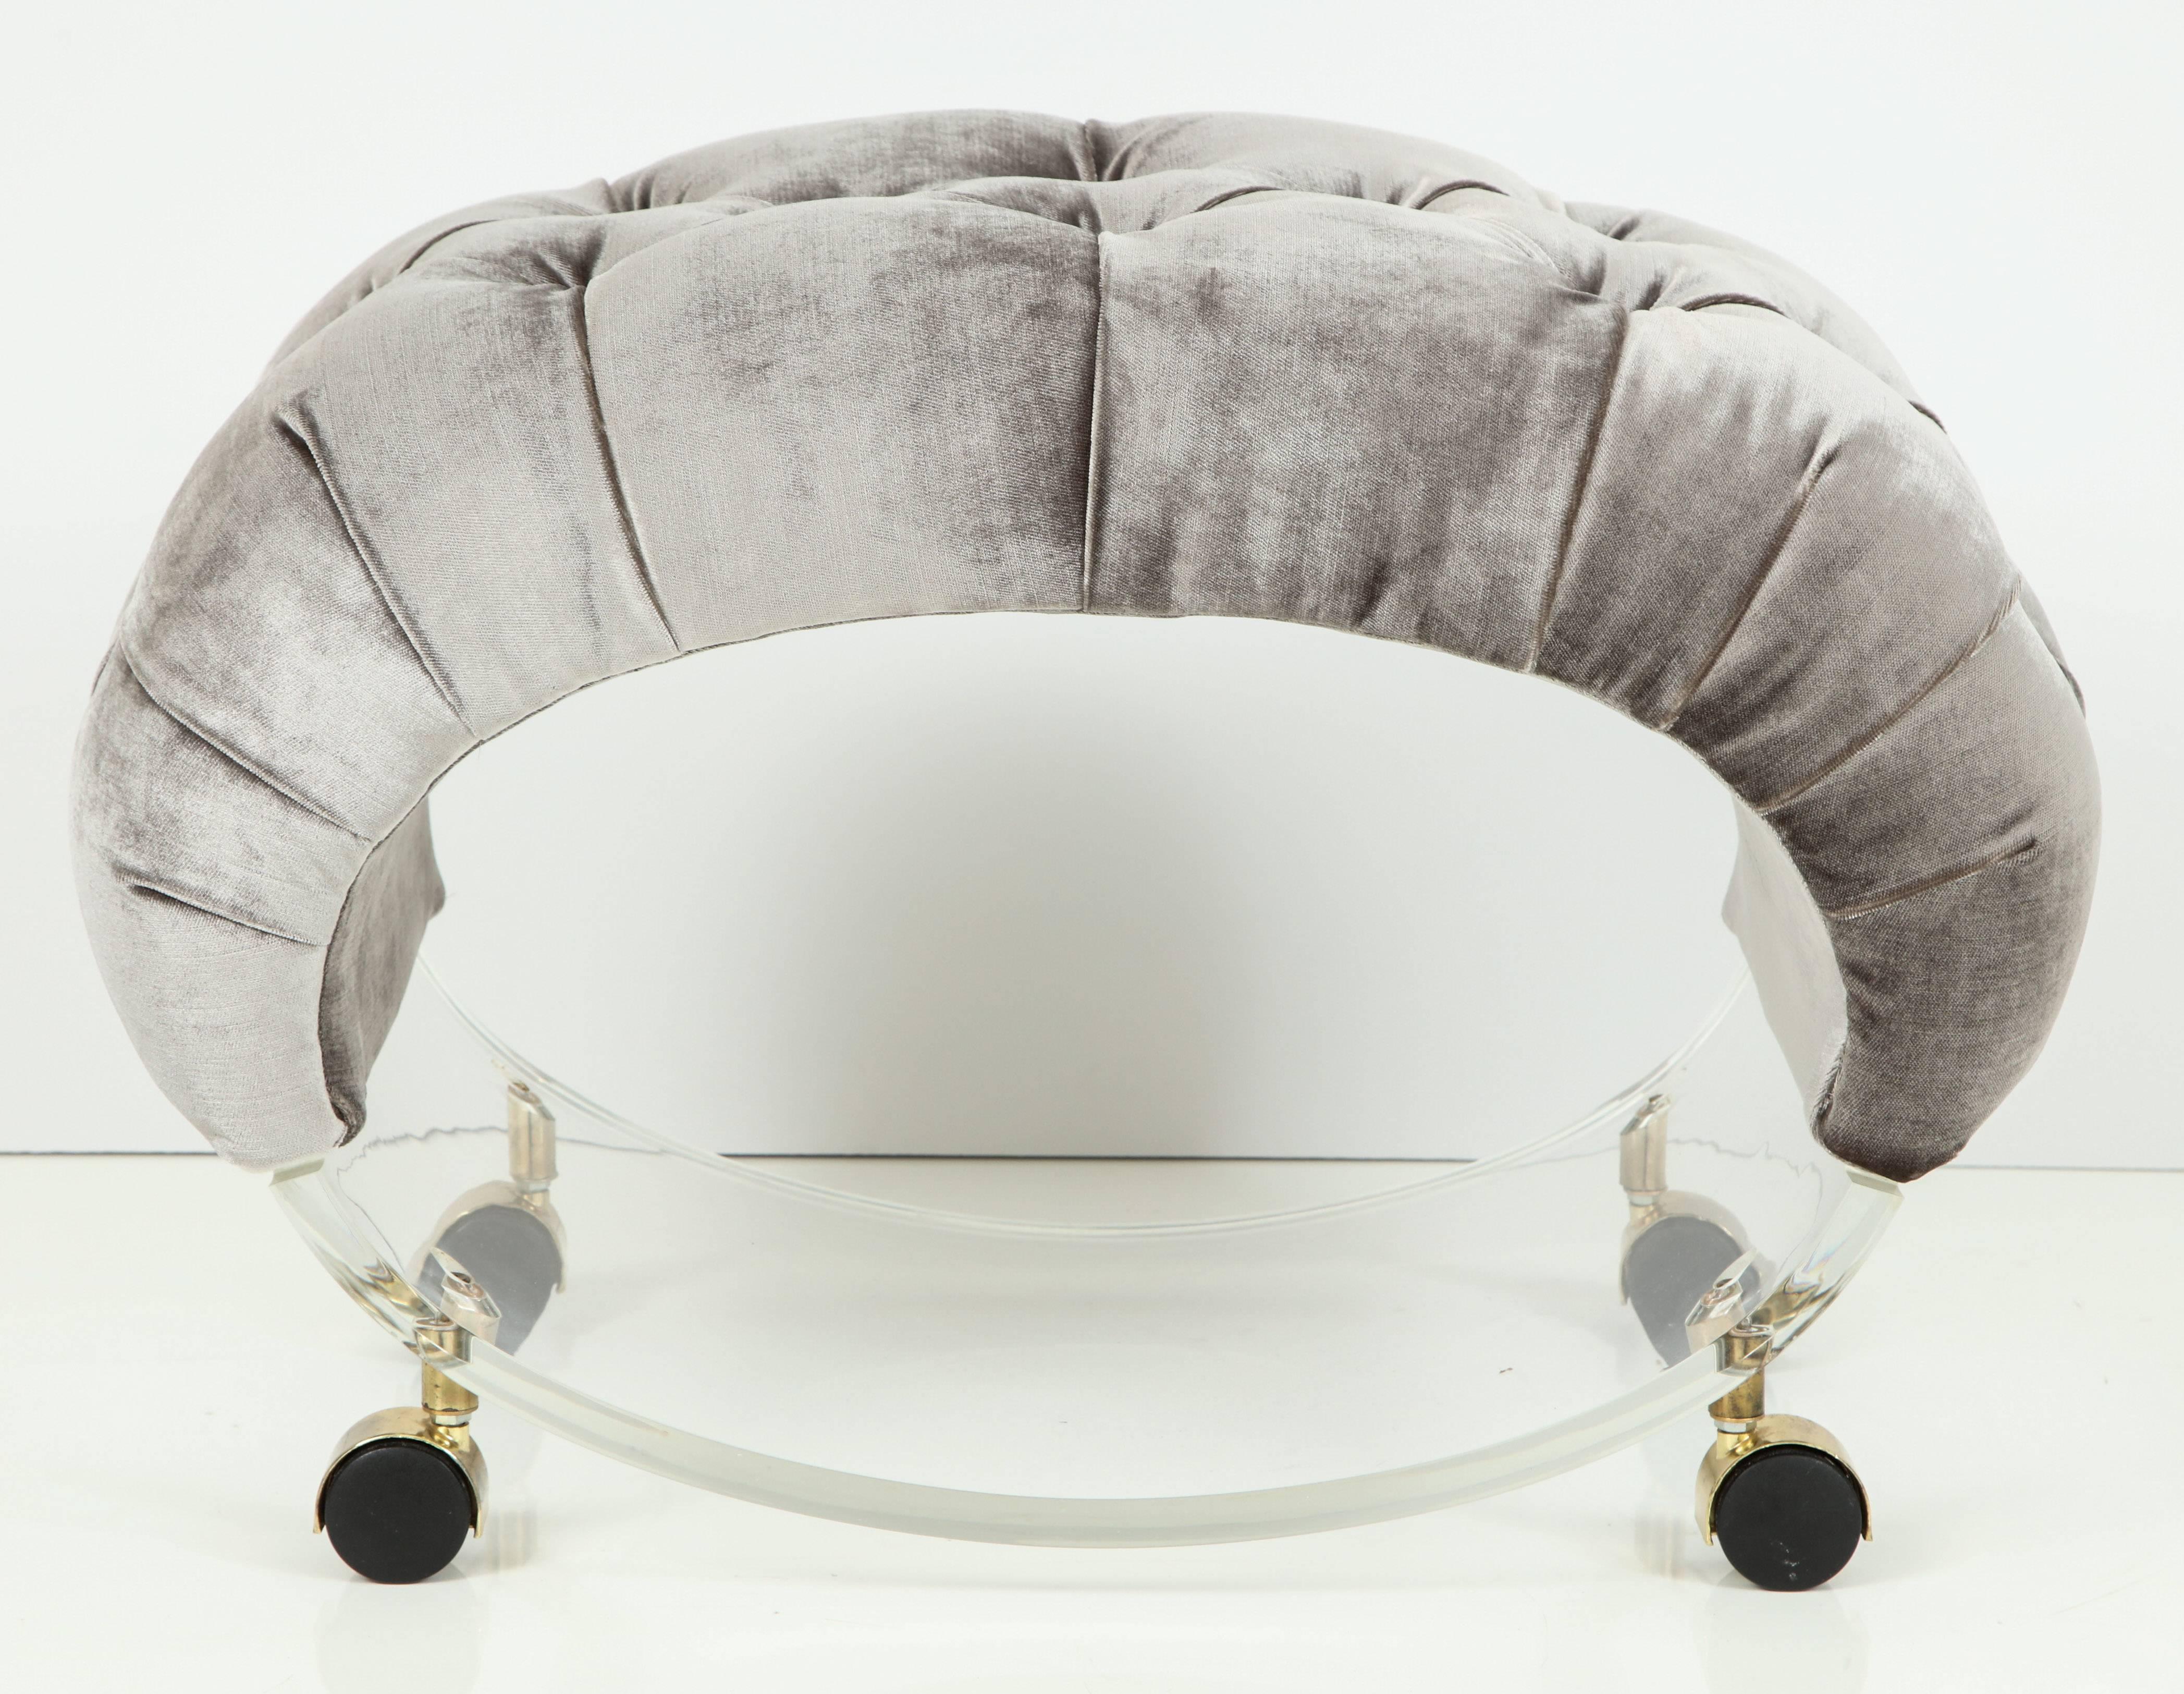 This unique sculptural Lucite stool is a jewel. Original brass casters and Lucite is in excellent condition with a few minor scratches from age that cannot even be photographed they are so light and minor. Newly upholstered and tufted in a luscious